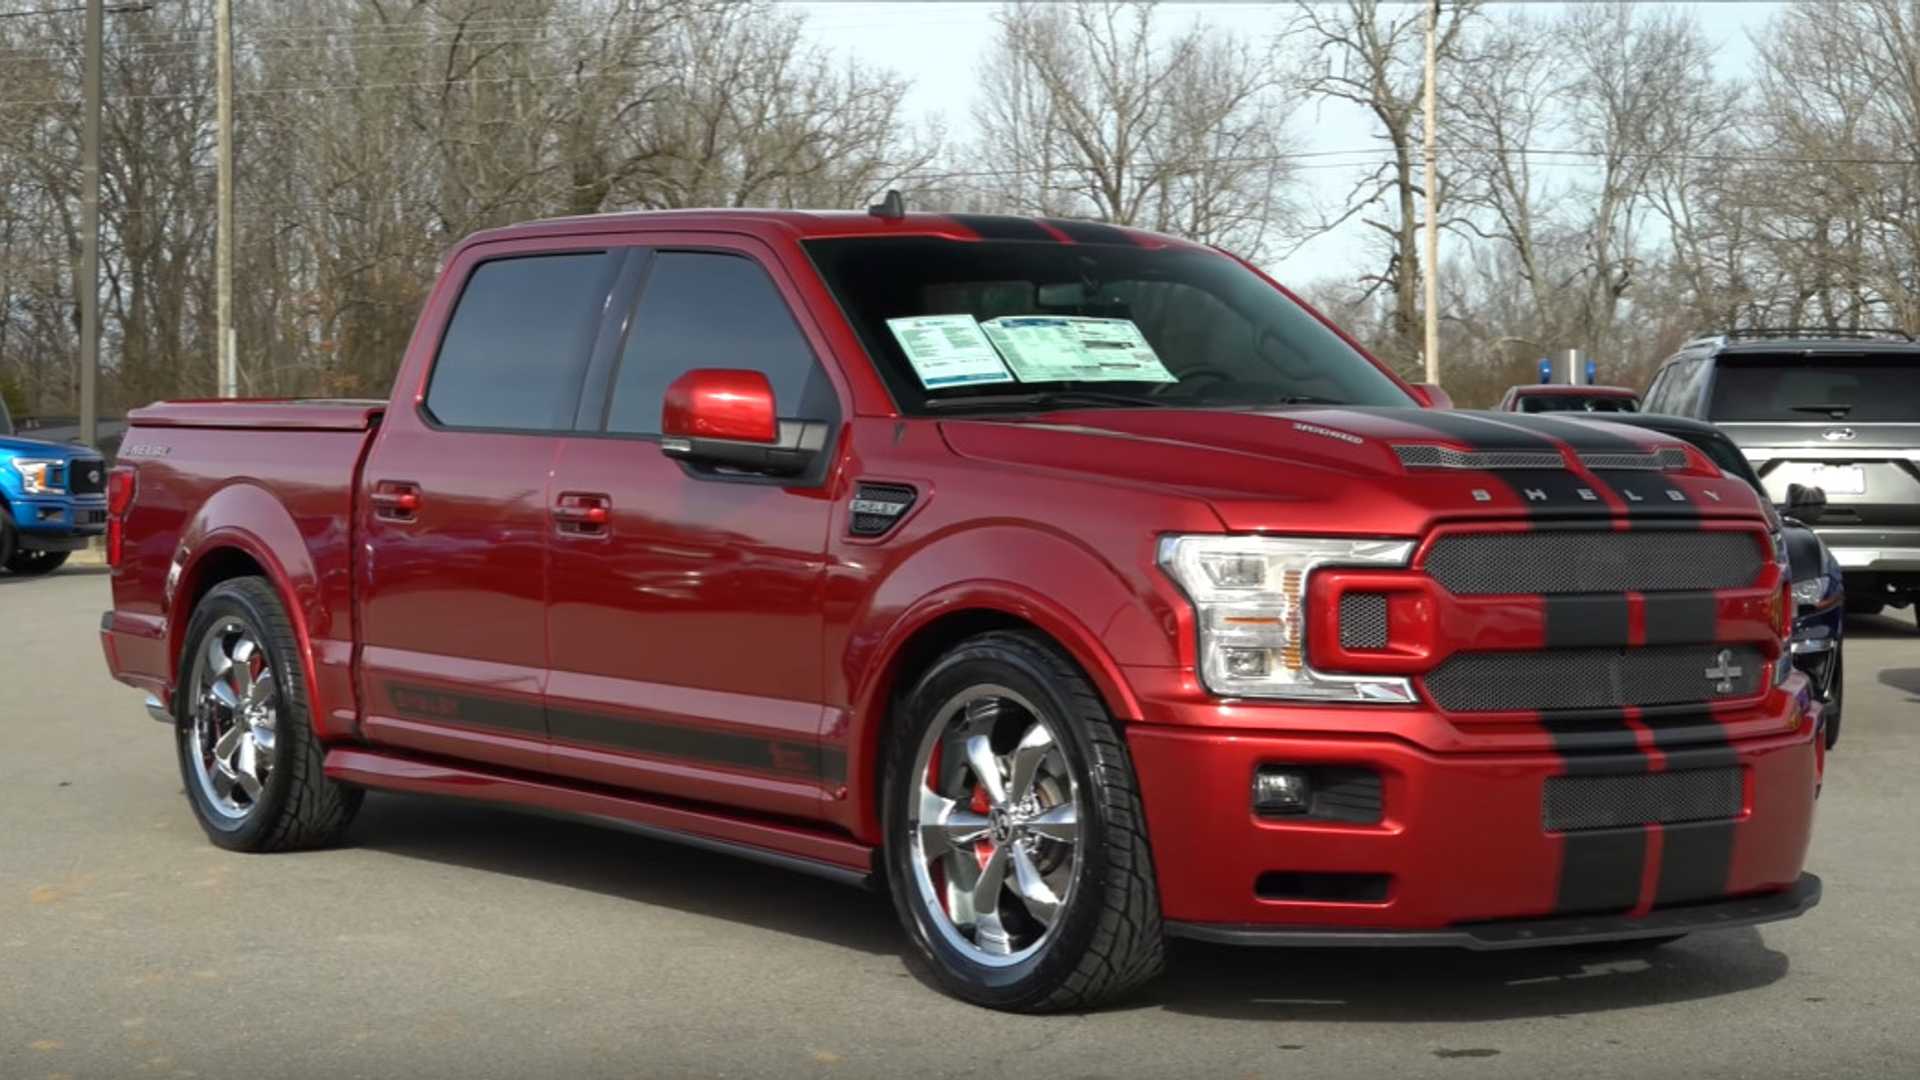 Shelby Supercharged F150 For Sale - kawevqmedic